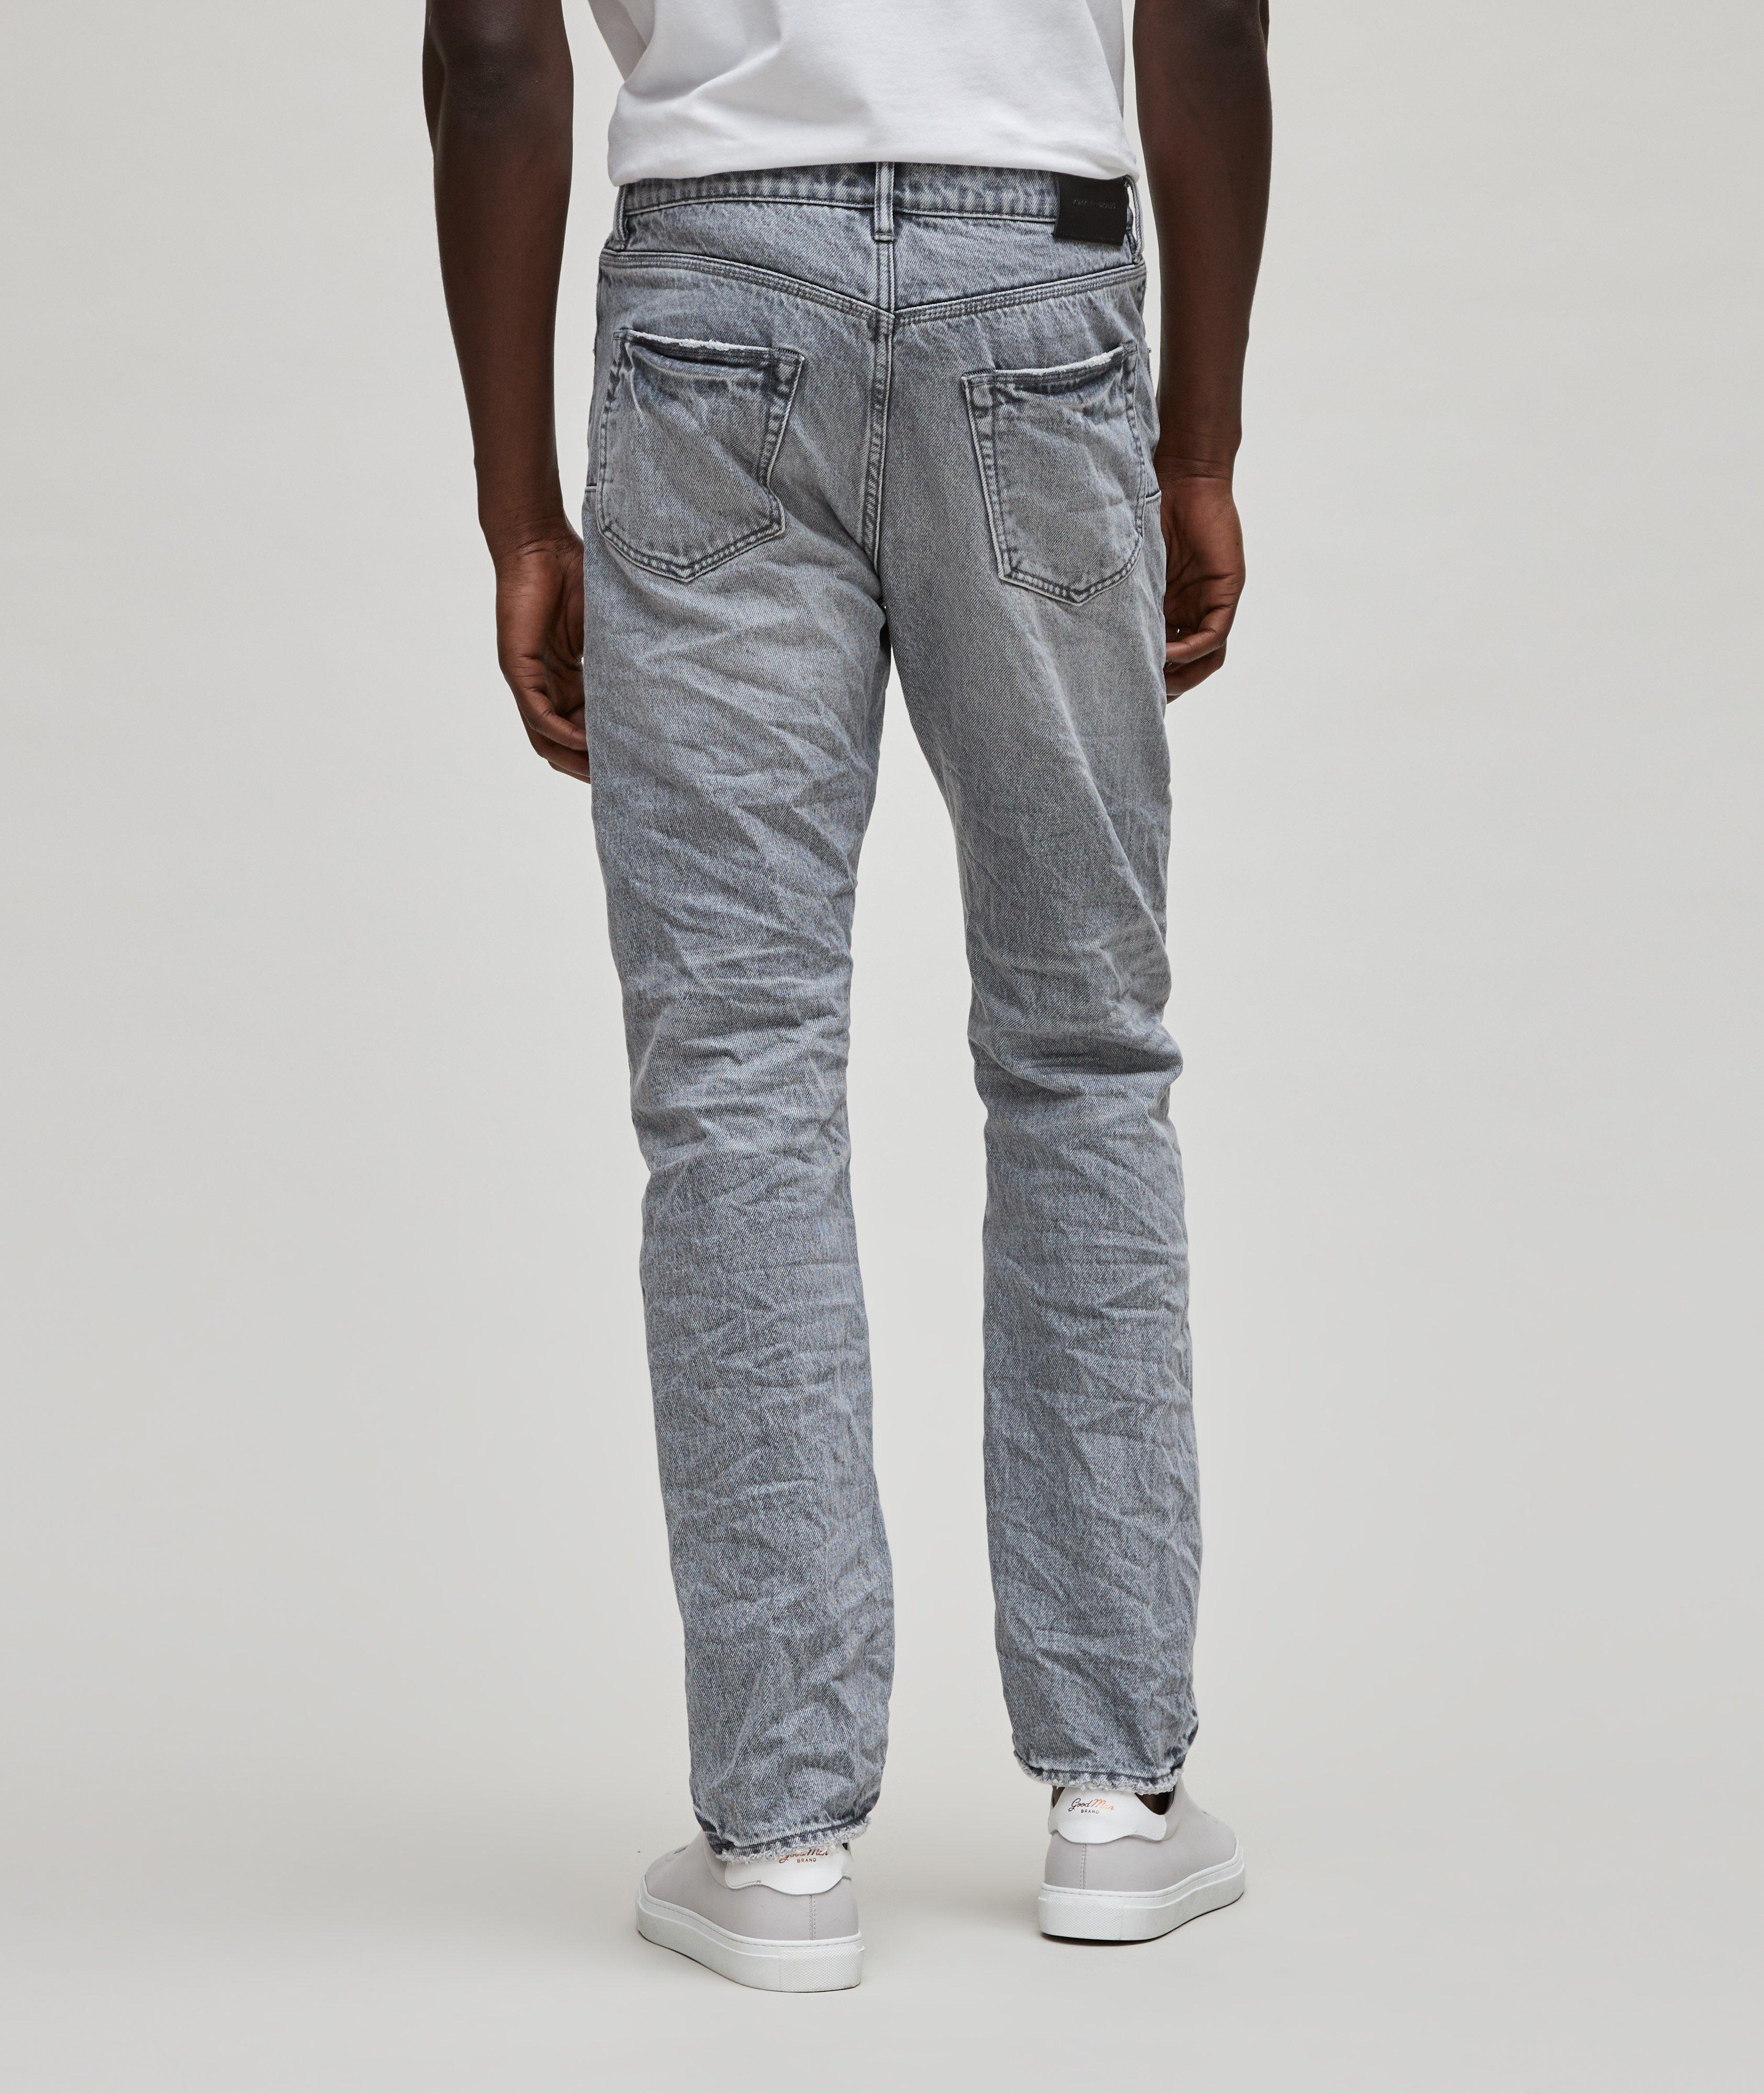 P005 Faded Effect Stretch-Cotton Jeans image 3